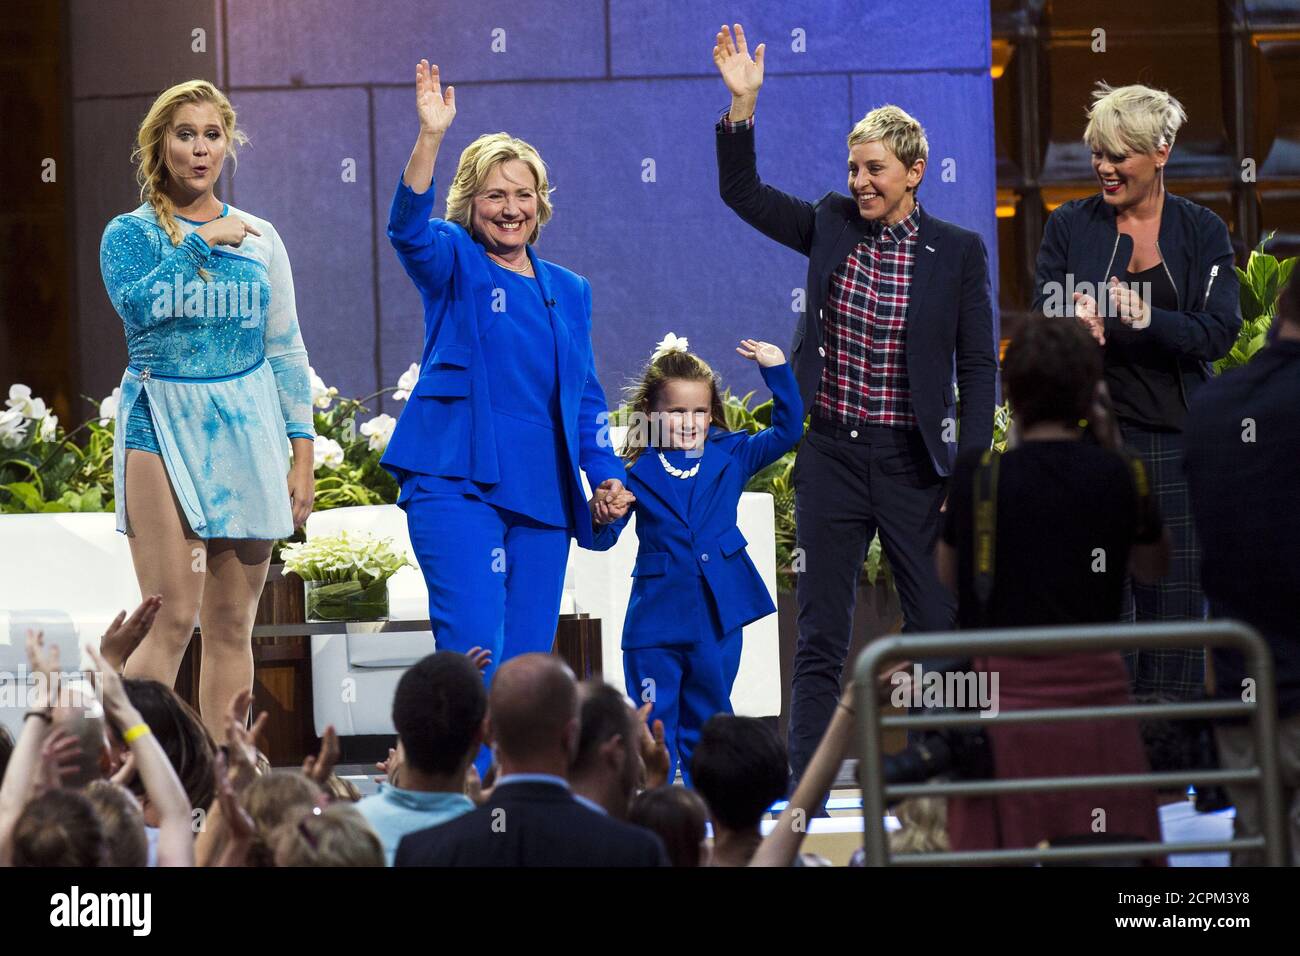 U.S. Democratic presidential candidate Hillary Clinton (2nd L) waves with  (L-R) comedian Amy Schumer, 5-year-old presidential expert Macey Hensley,  television host Ellen DeGeneres, and singer Pink during a taping of "The  Ellen